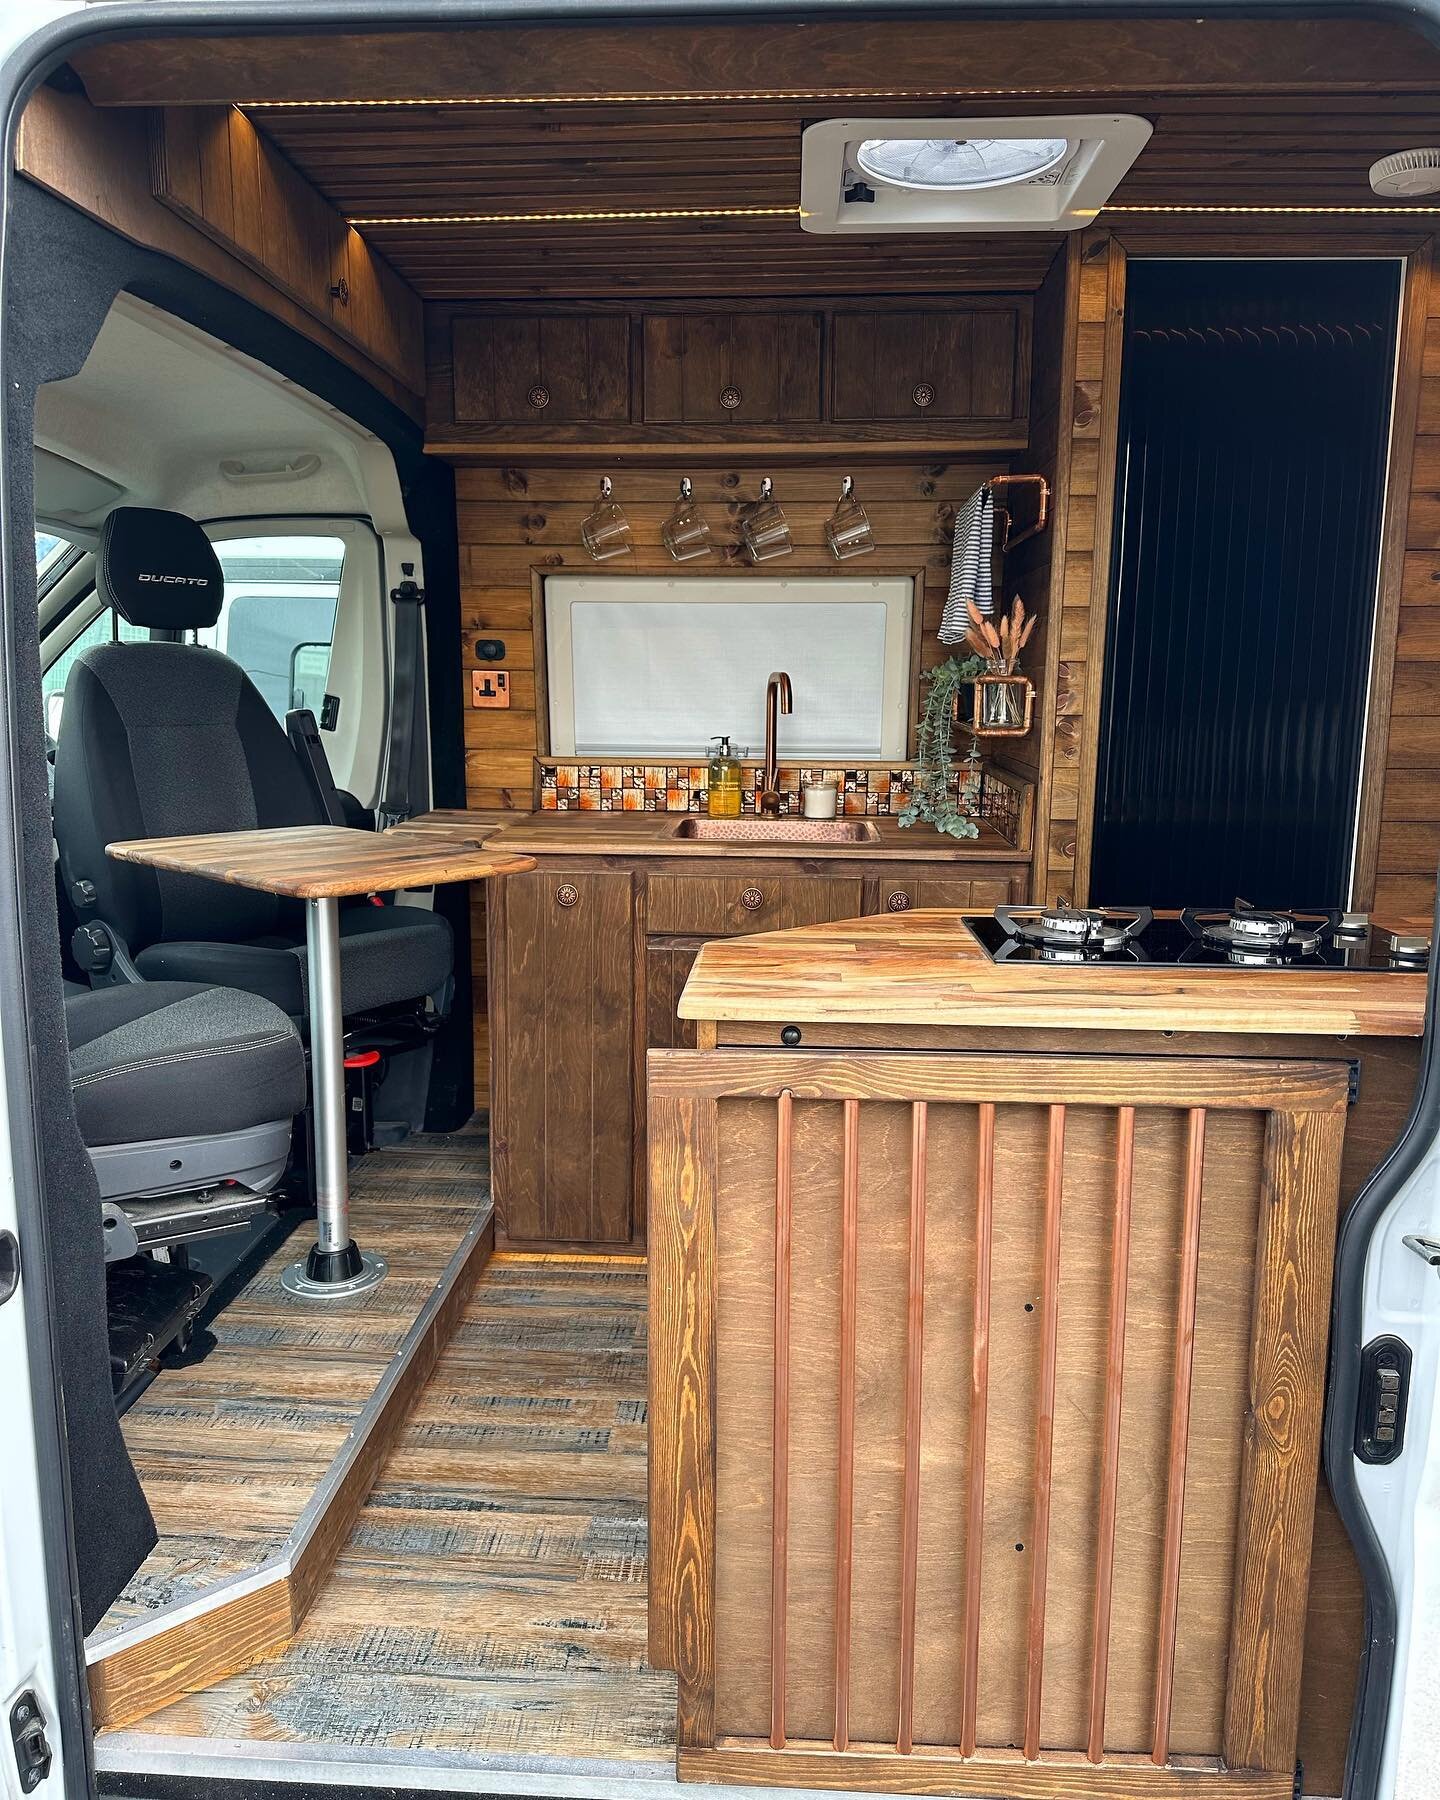 we&rsquo;ve never had so many messages &amp; comments about a sink! 😍🥰😅

We loved the copper features in this van - our customers have good taste! 👏🏼 

#vanlife #vanlifeinspo #vanlifediaries #vanlifemovement #vanlifeideas #vanlifeeurope #vanlife